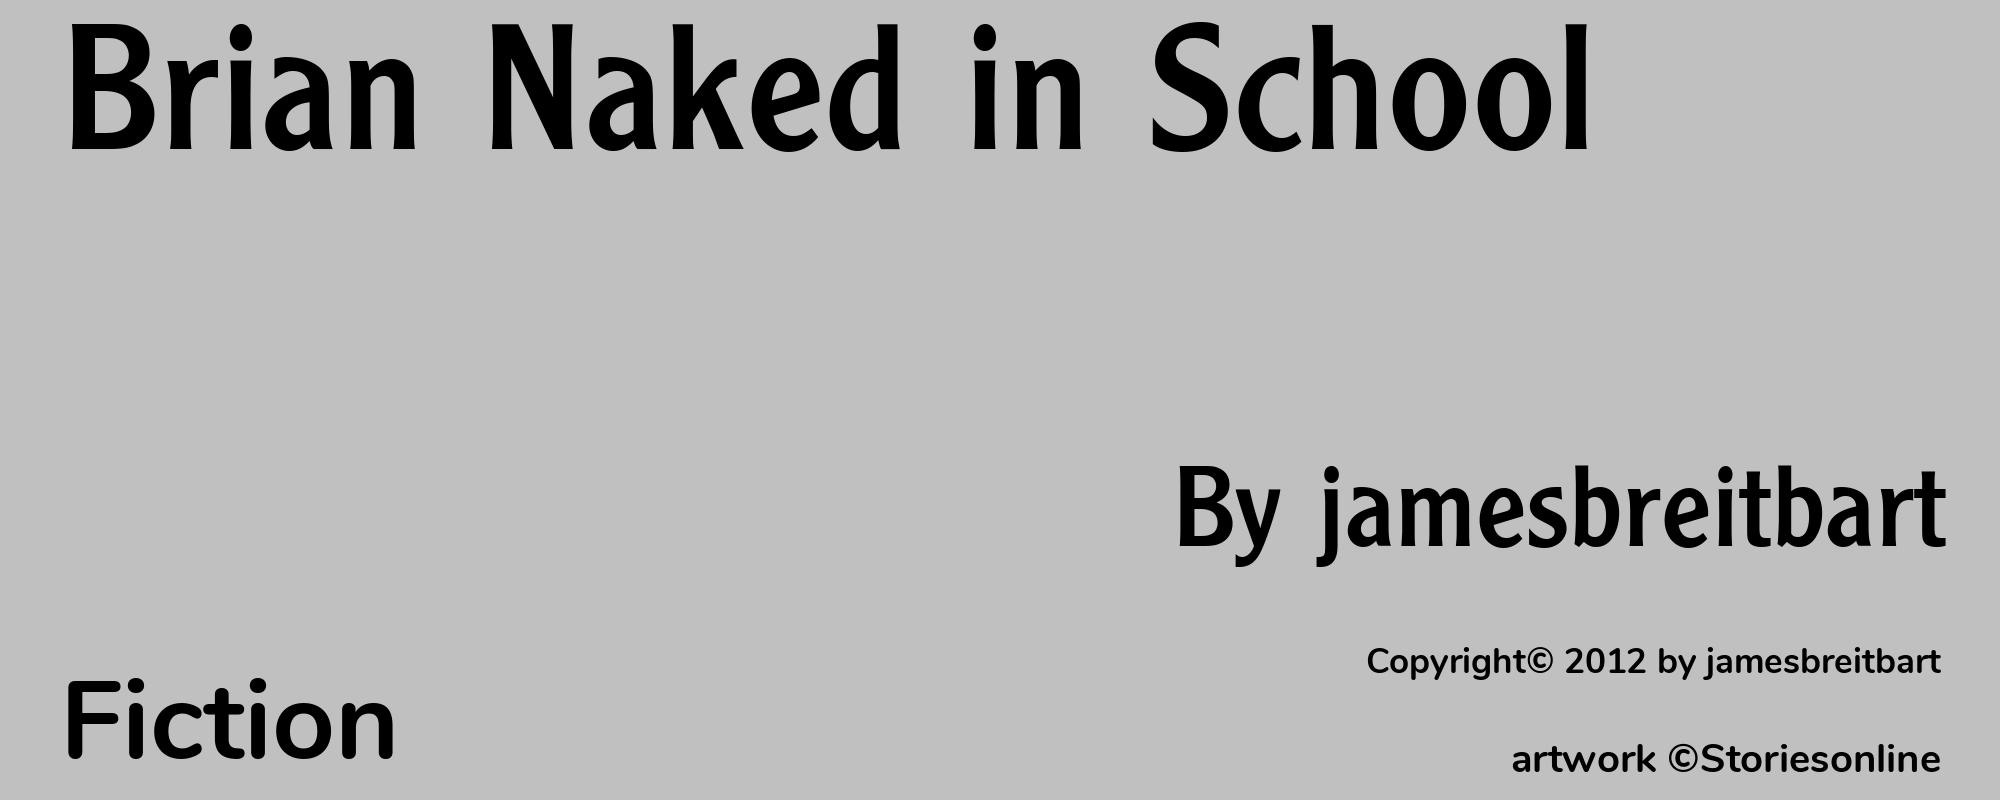 Brian Naked in School - Cover